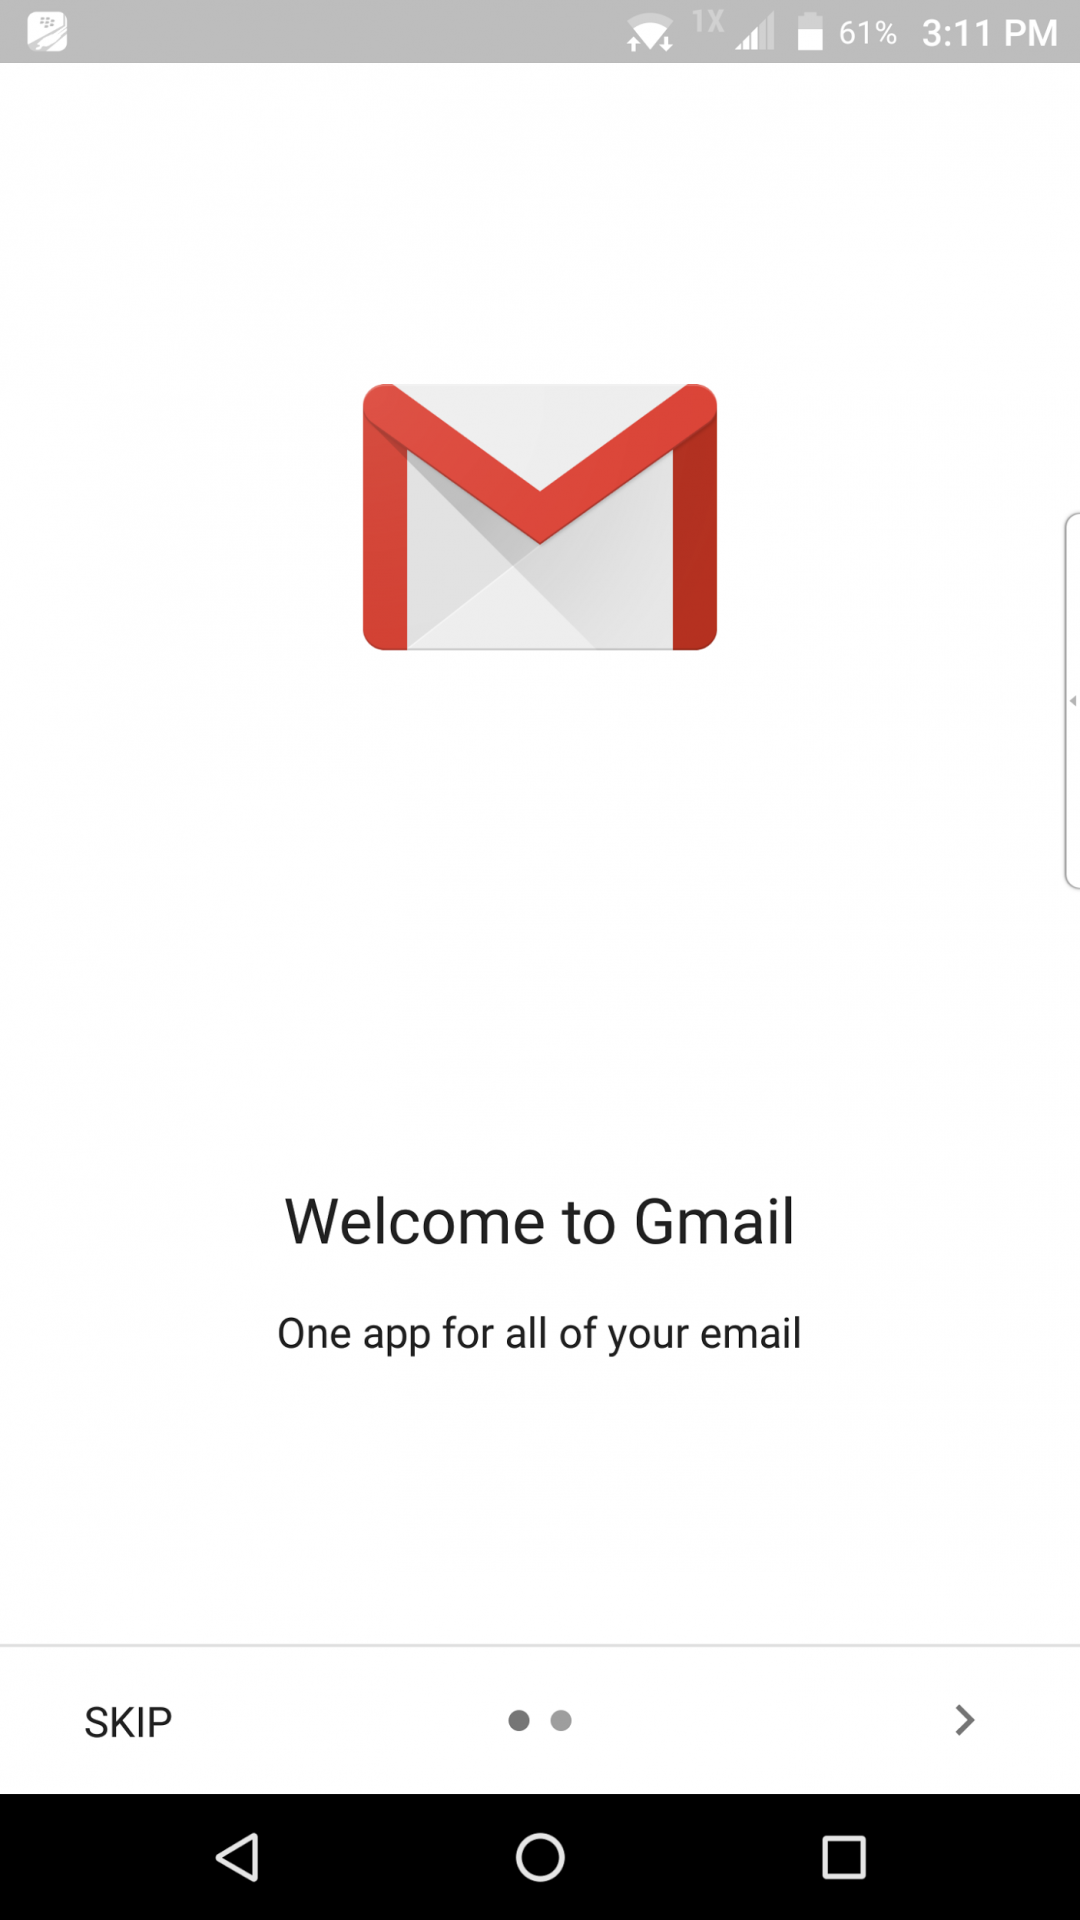 New in Gmail screen with Skip button